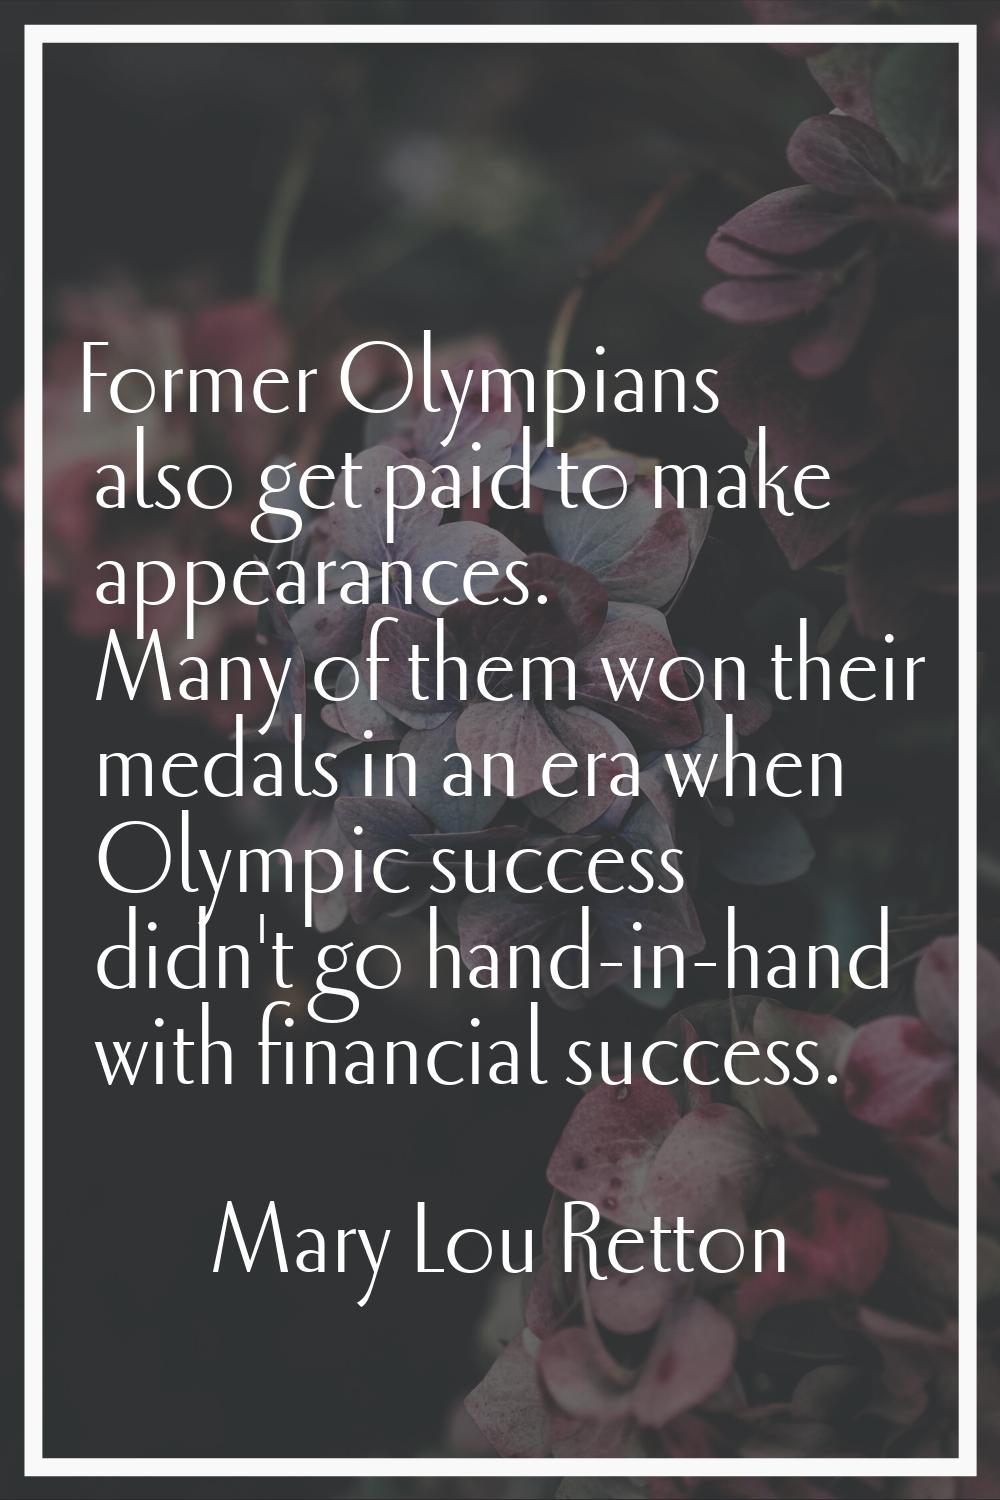 Former Olympians also get paid to make appearances. Many of them won their medals in an era when Ol